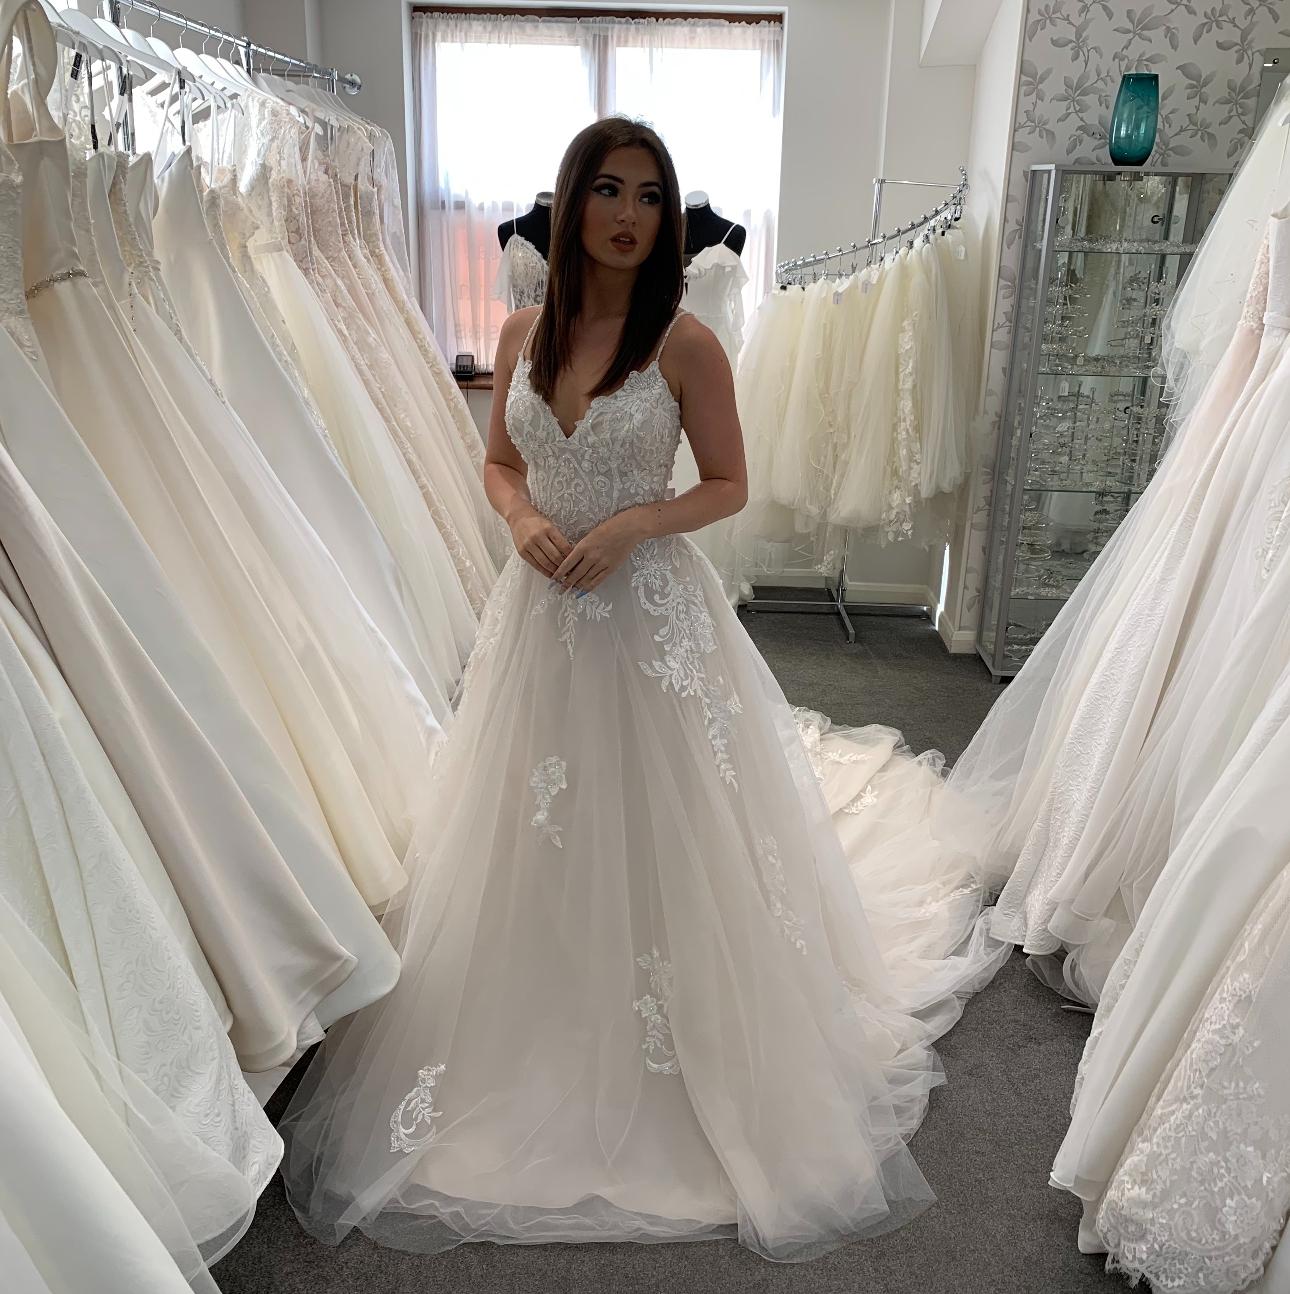 Find your dream dress with Ivy Blue at The Brentwood Centre: Image 1